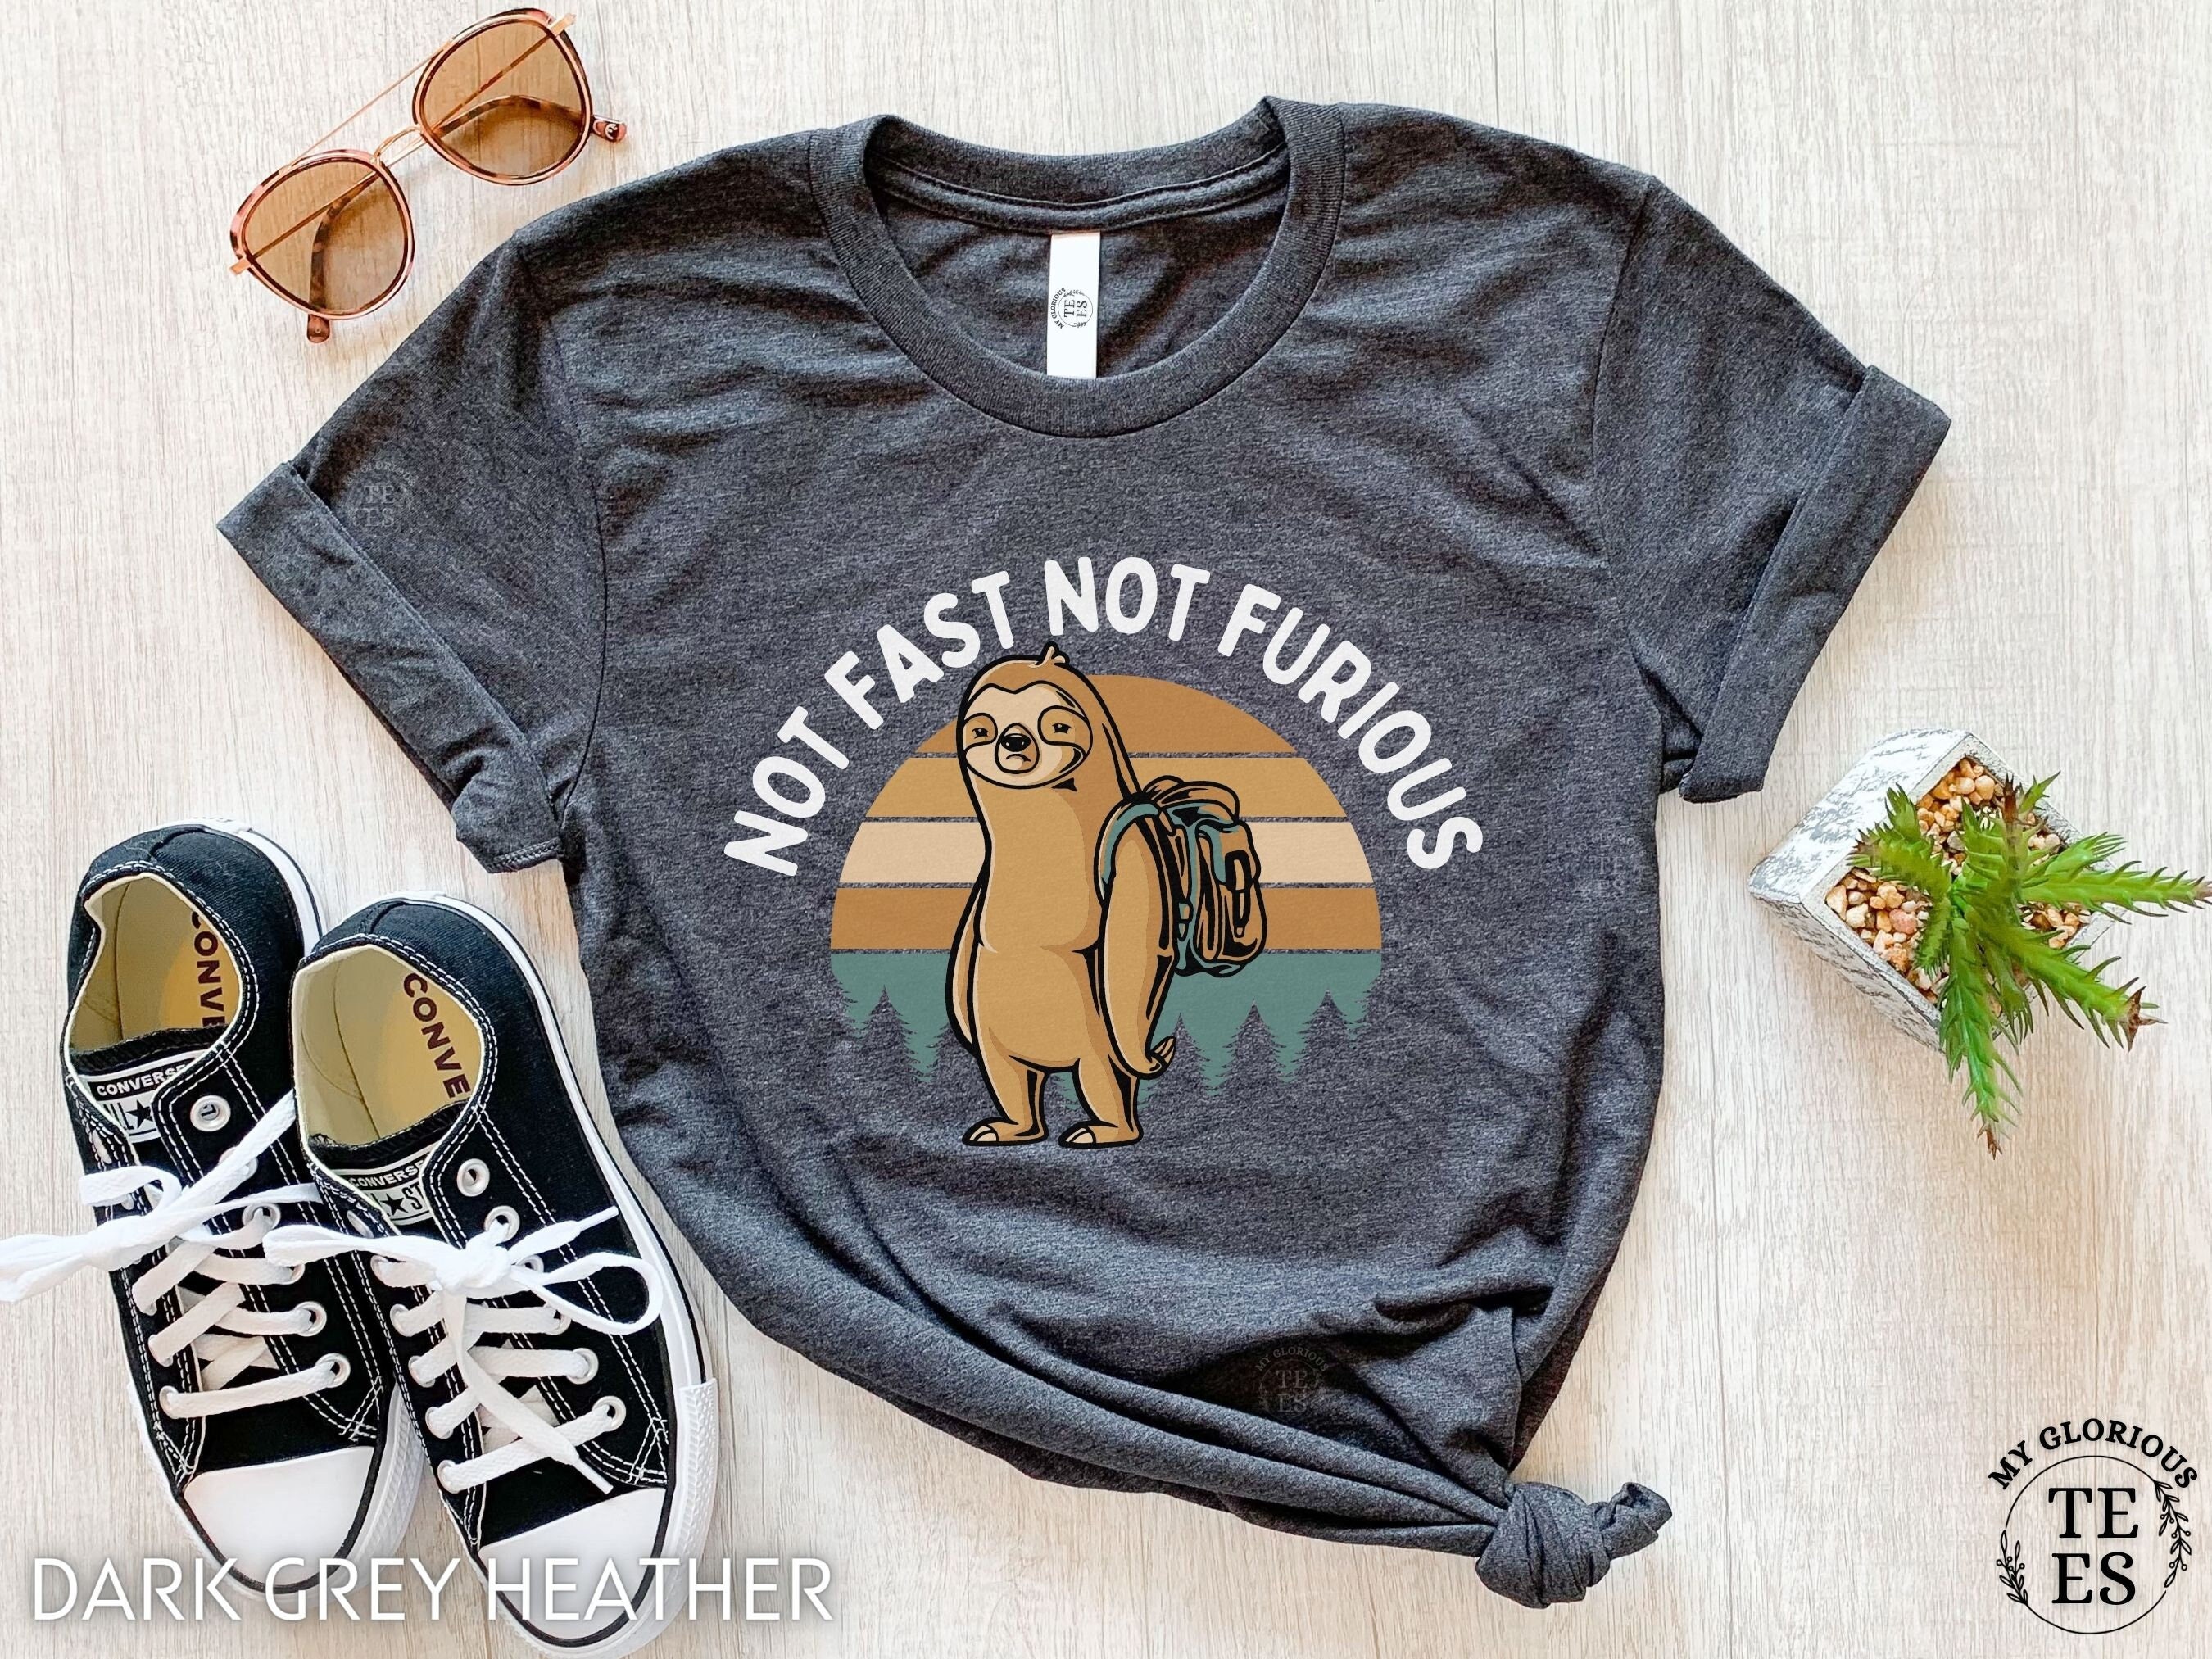 Discover Not Fast Not Furious, Sloth Hiking Shirt, Sloth Shirt, Funny Sloth Tshirt, Sloth Gifts, Funny Hiking T Shirt